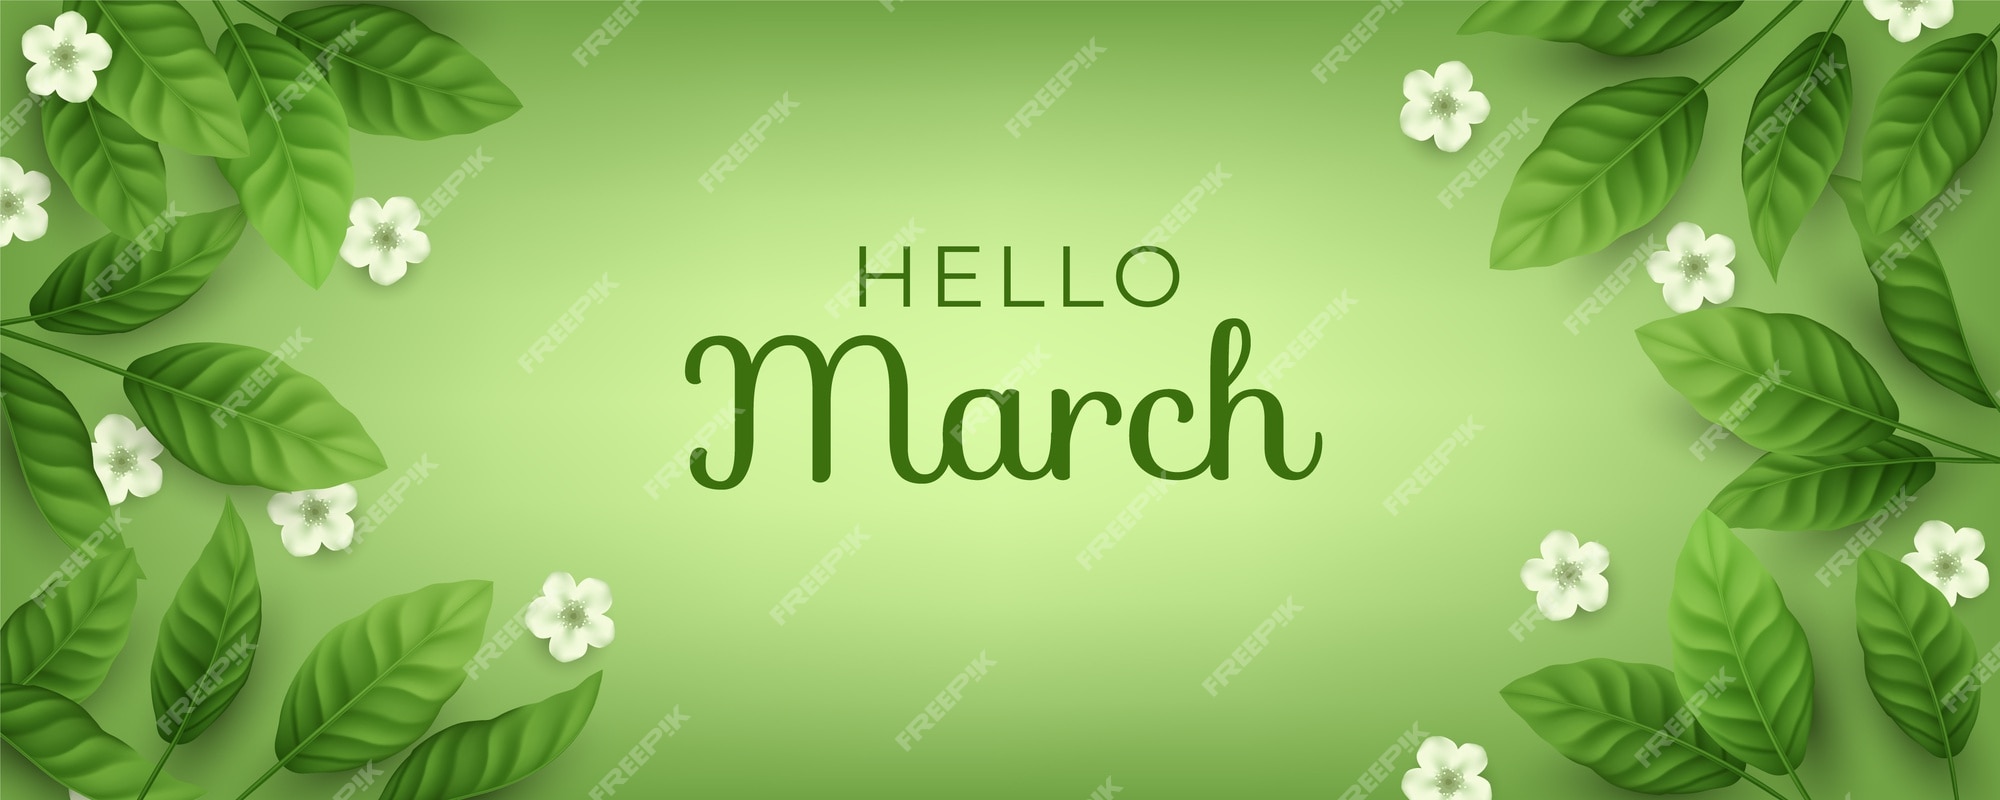 March Background Images - Free Download on Freepik